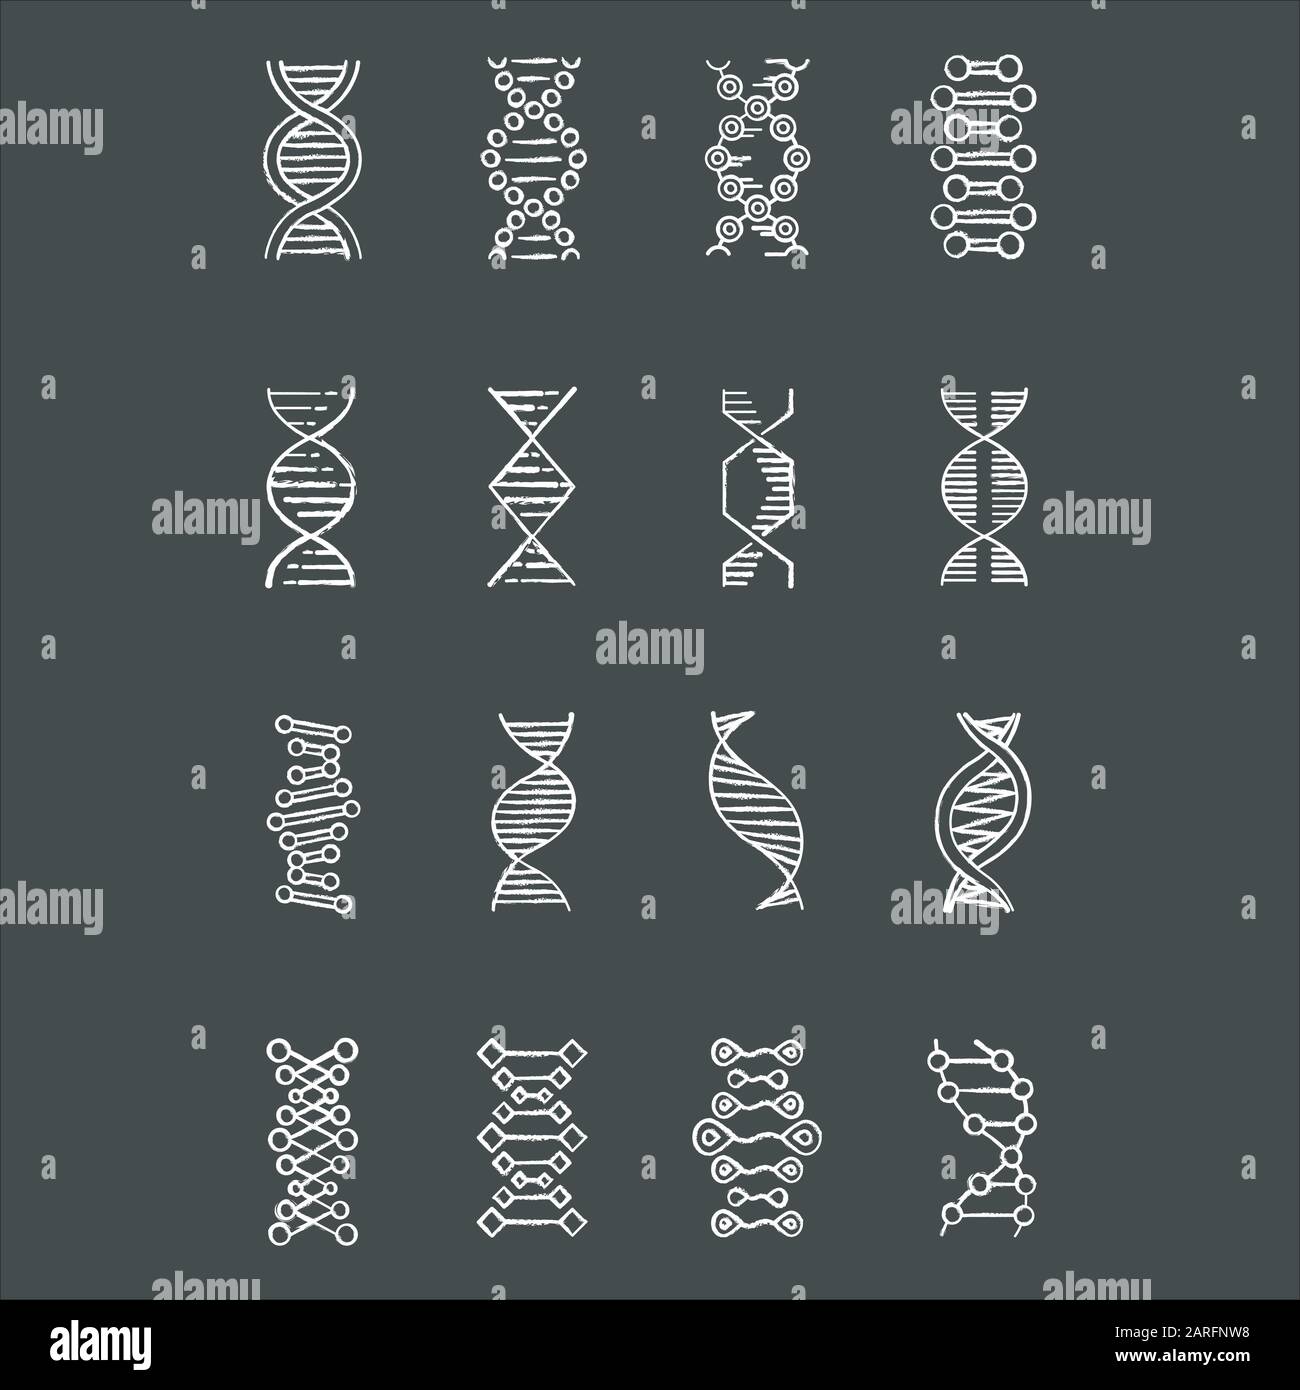 DNA helix chalk icons set. Deoxyribonucleic, nucleic acid structure. Spiraling strand. Chromosome. Molecular biology. Genetic code. Genome. Genetics. Stock Vector